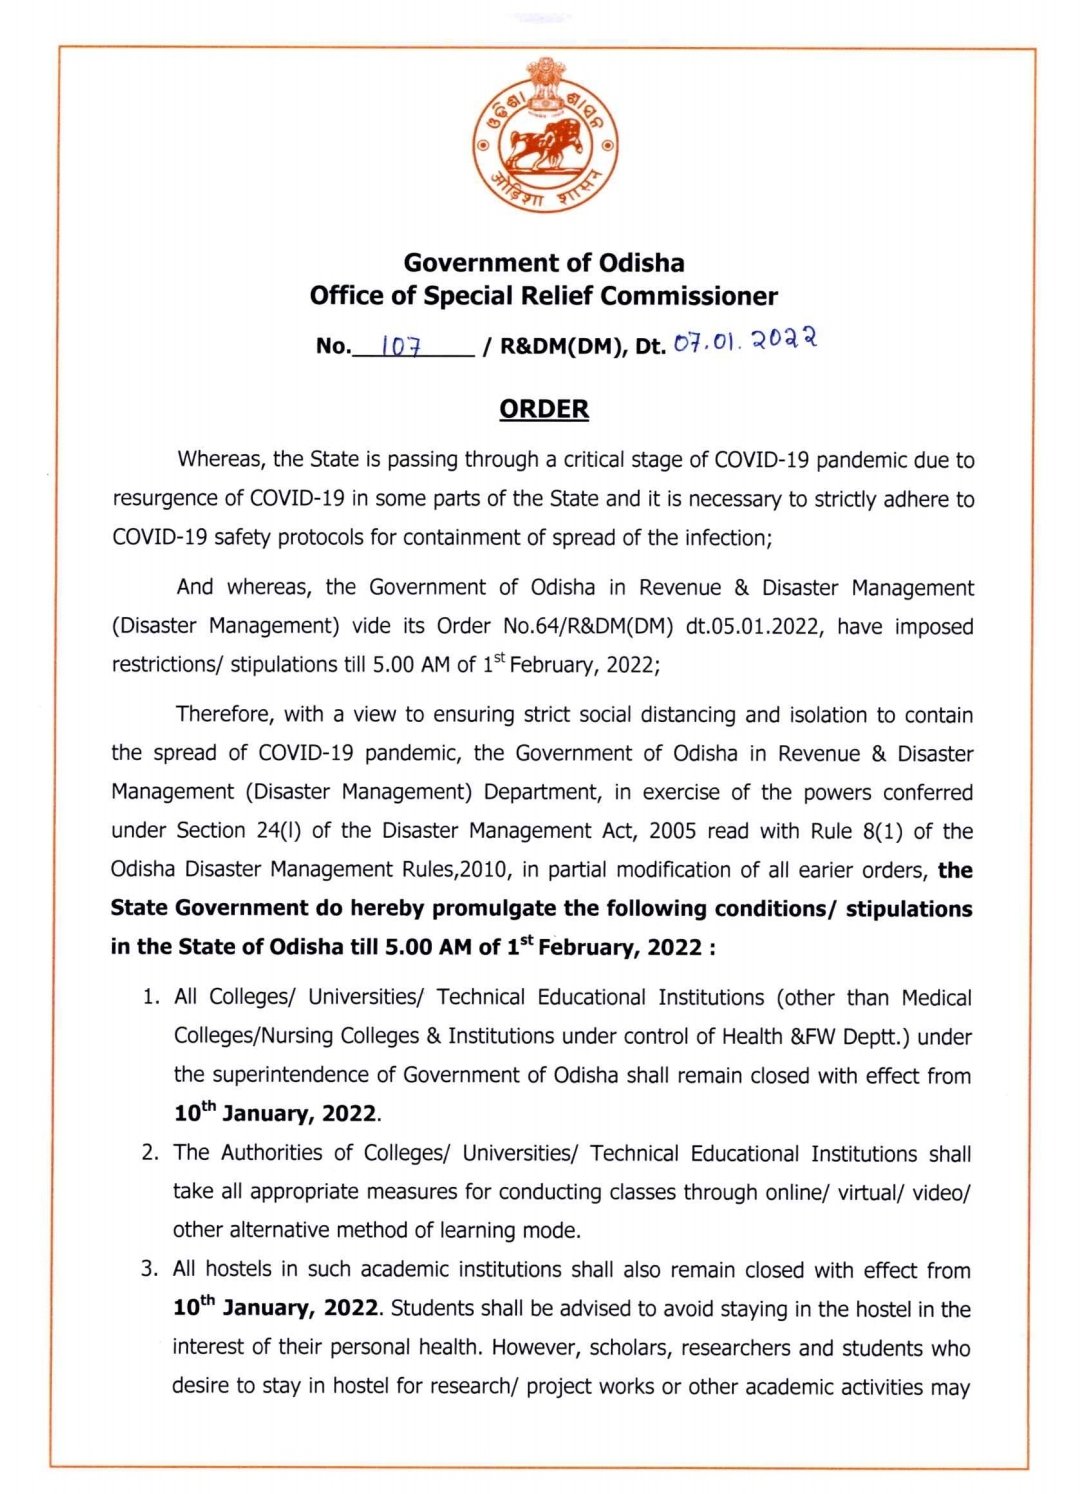 new guidelines for covid-19 in odisha, cov, covid-19 vaccine report download cause of covid-19 www covid-19 world tracker co-win, latest sop for covid-19 in assam covid-19 vaccine 2nd dose registration covid 19 vaccination certificate covid-19 test results online india covid vaccine registration website covid-19 test report online check covid-19 vaccine certificate download pdf by mobile number covin gov.in co vaccine registration covaxin certificate panbio covid-19 antigen self-test